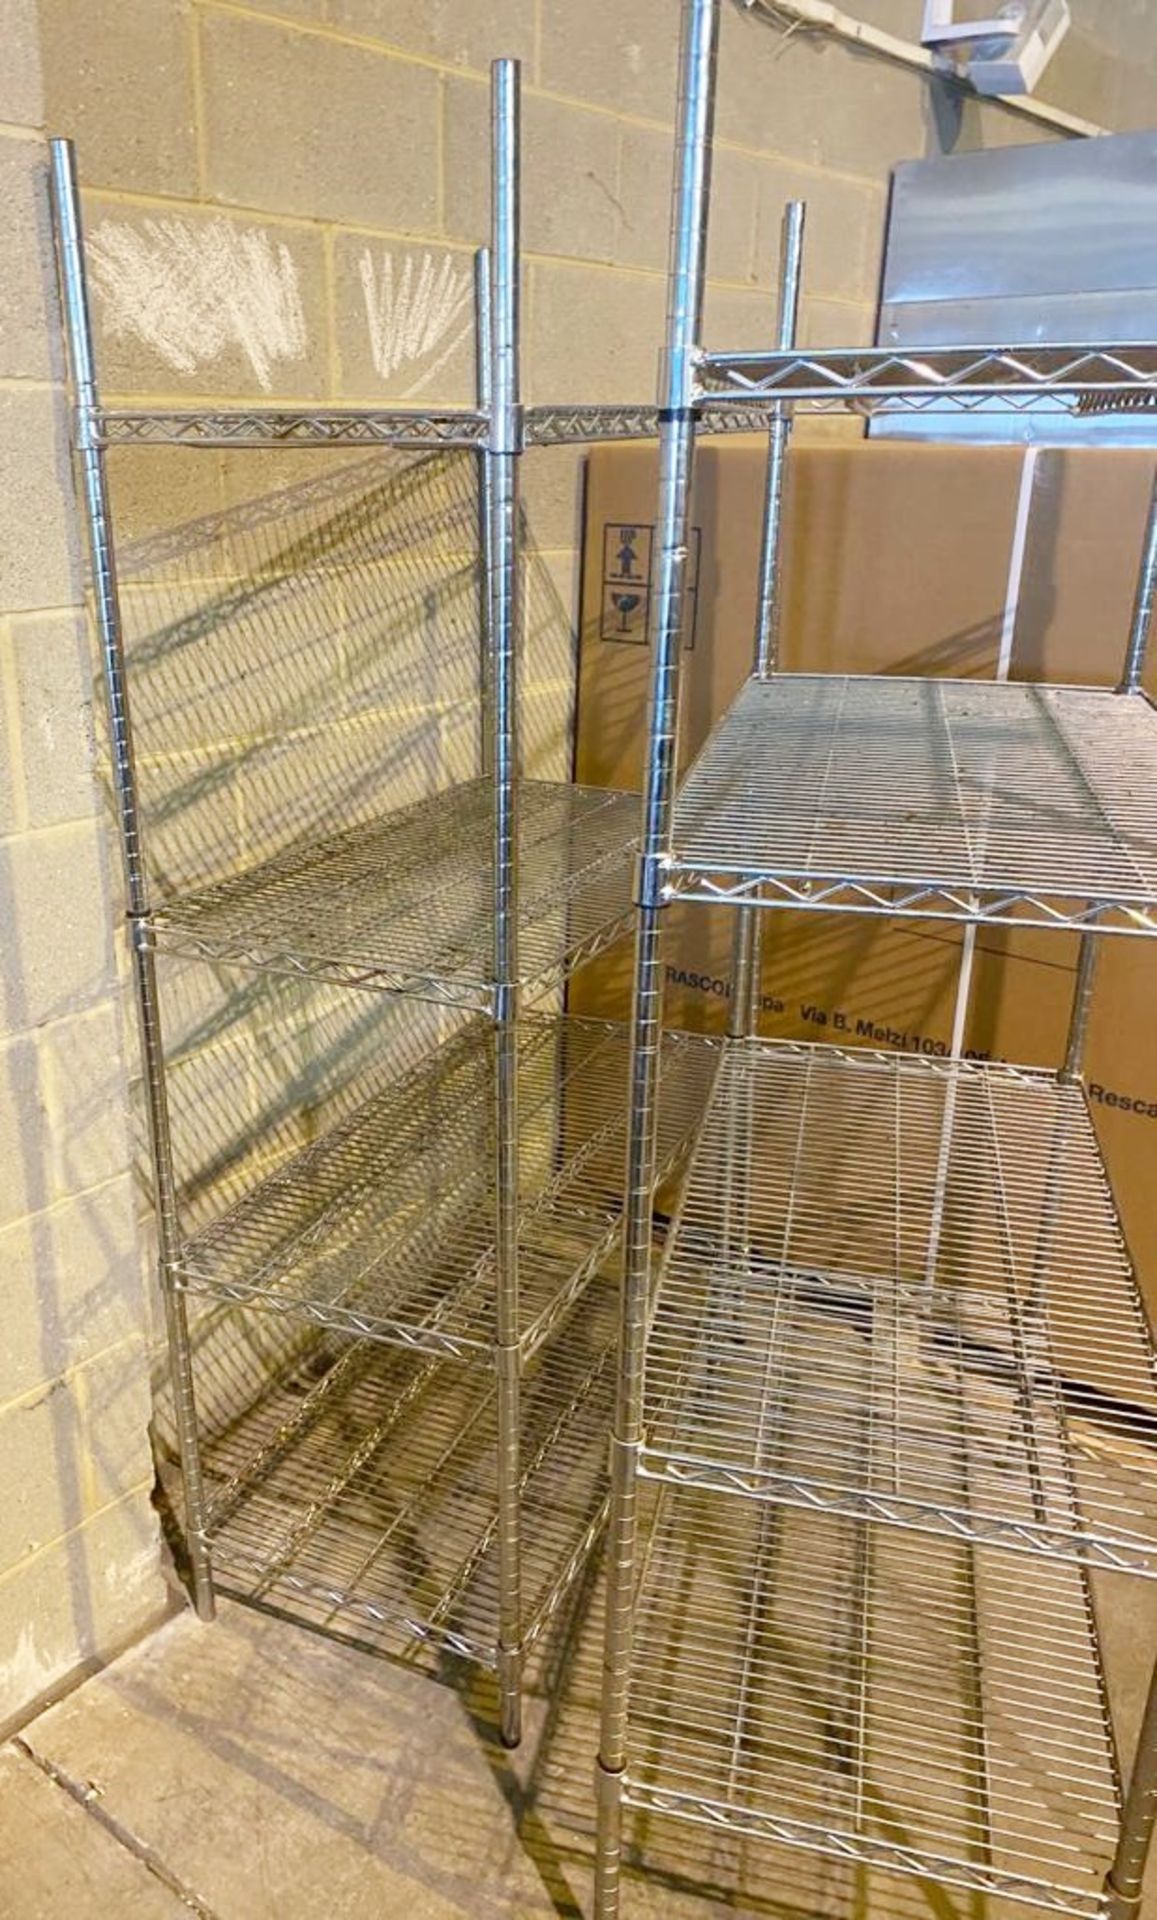 2 x Four Tier Wire Storage Shelves For Commercial Kitchens